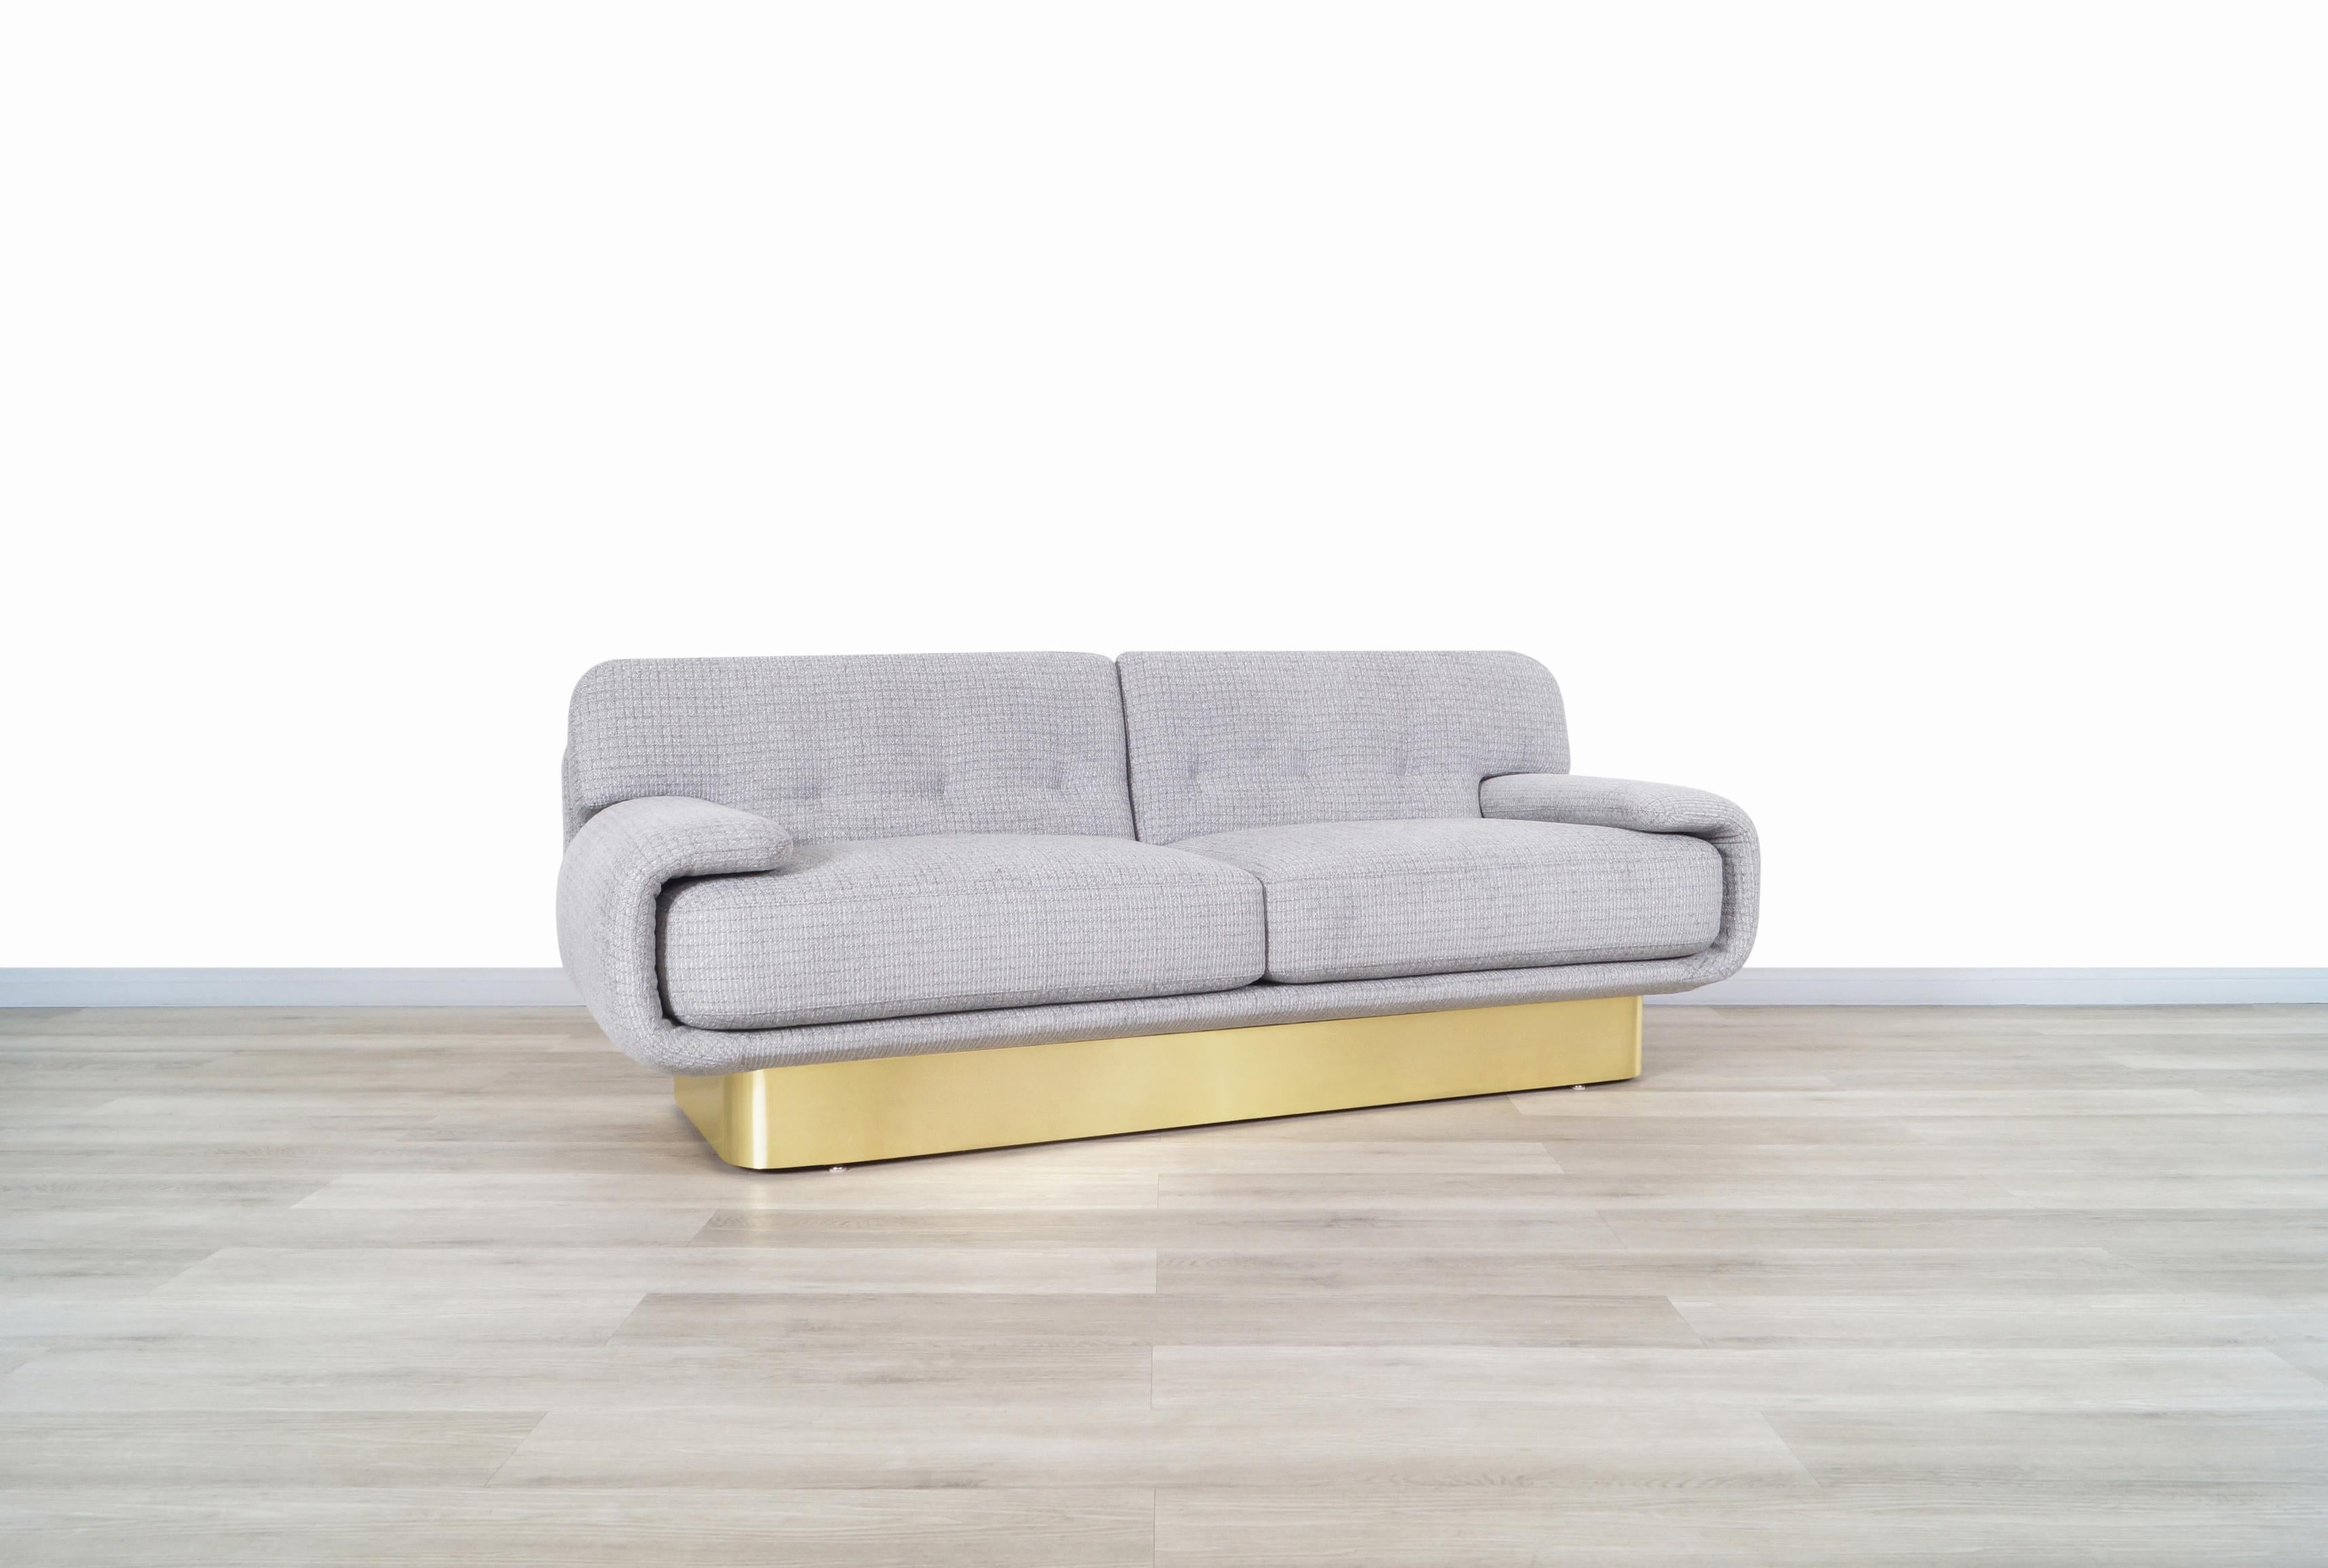 Fabulous Mid-Century Modern sofa designed in the United States, circa 1970s. Features an innovative design where the structure of the sofa stands out, showcasing both sculptural armrests wrapping around the cushions. The sofa rests on a shiny